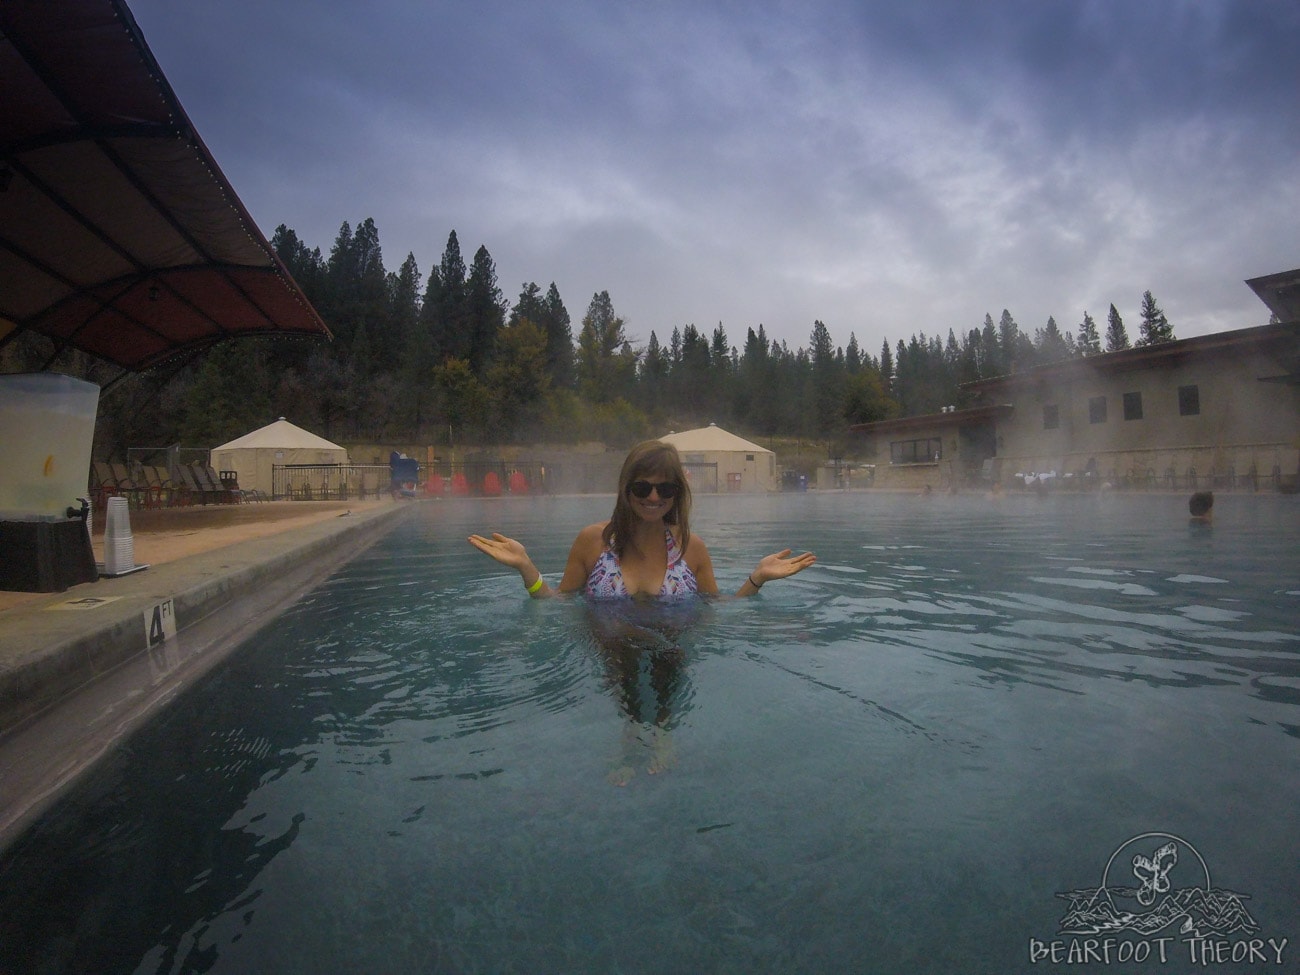 Kristen smiling for photo while soaking in large hot spring pool at The Springs in Idaho City hot springs resort